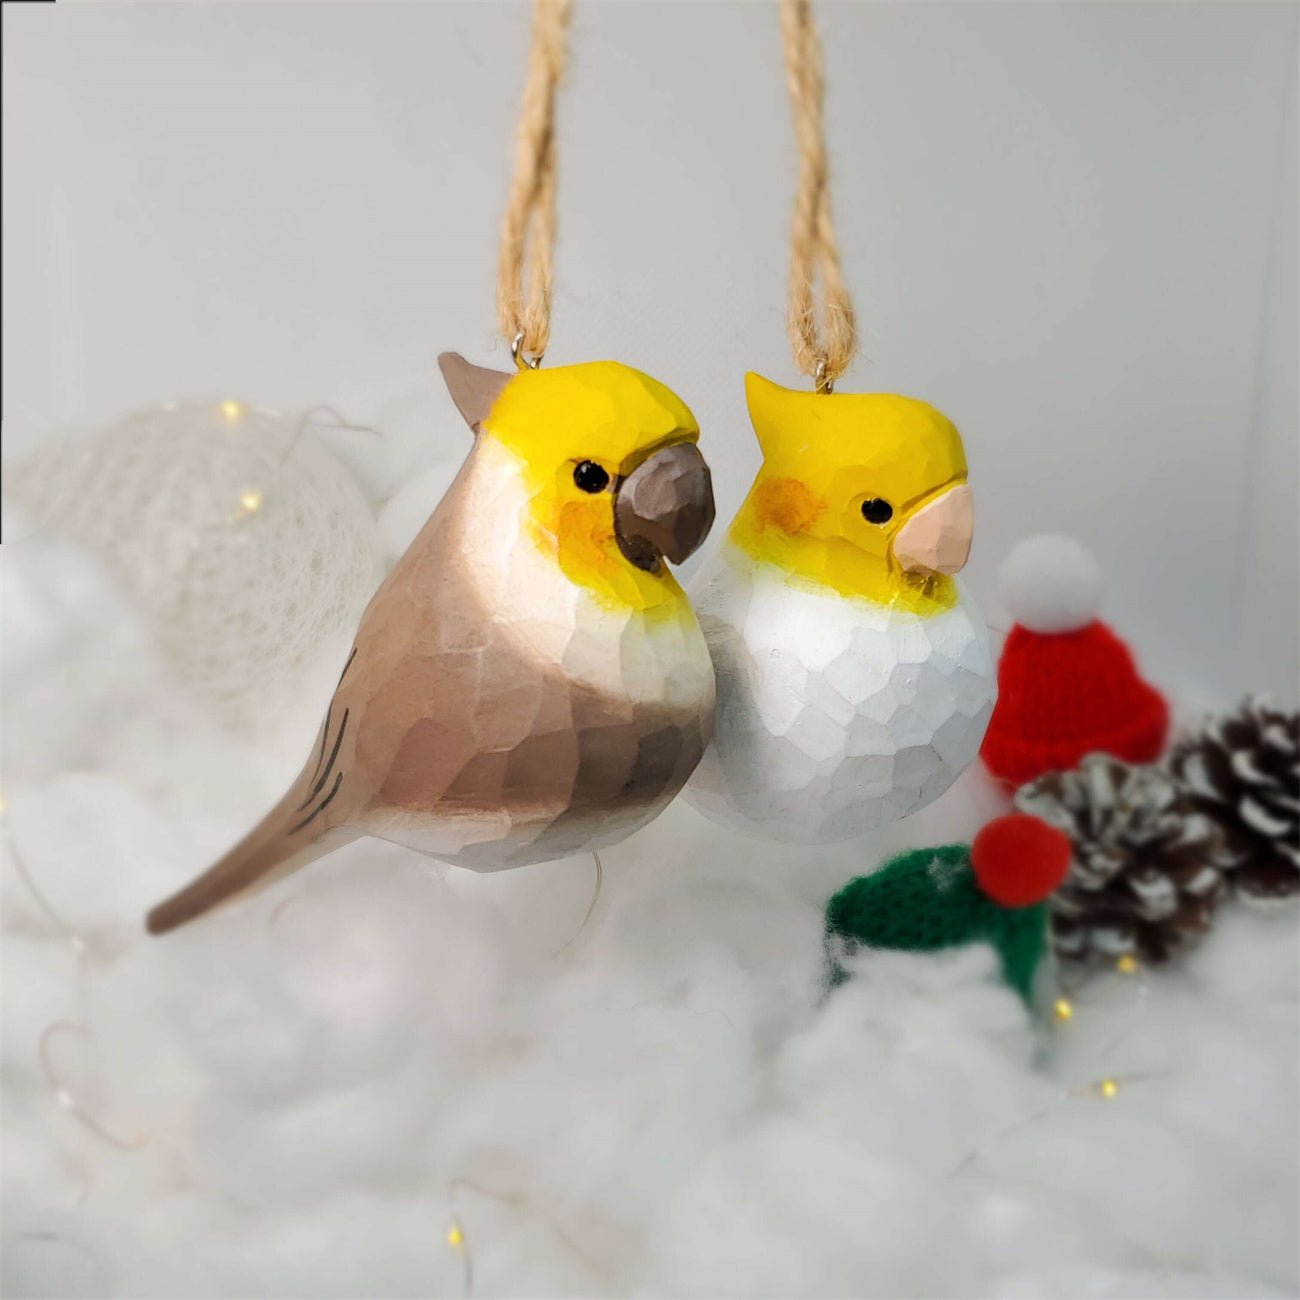 Cockatiel Carved and Painted Wooden Bird Ornaments - PAINTED BIRD SHOP